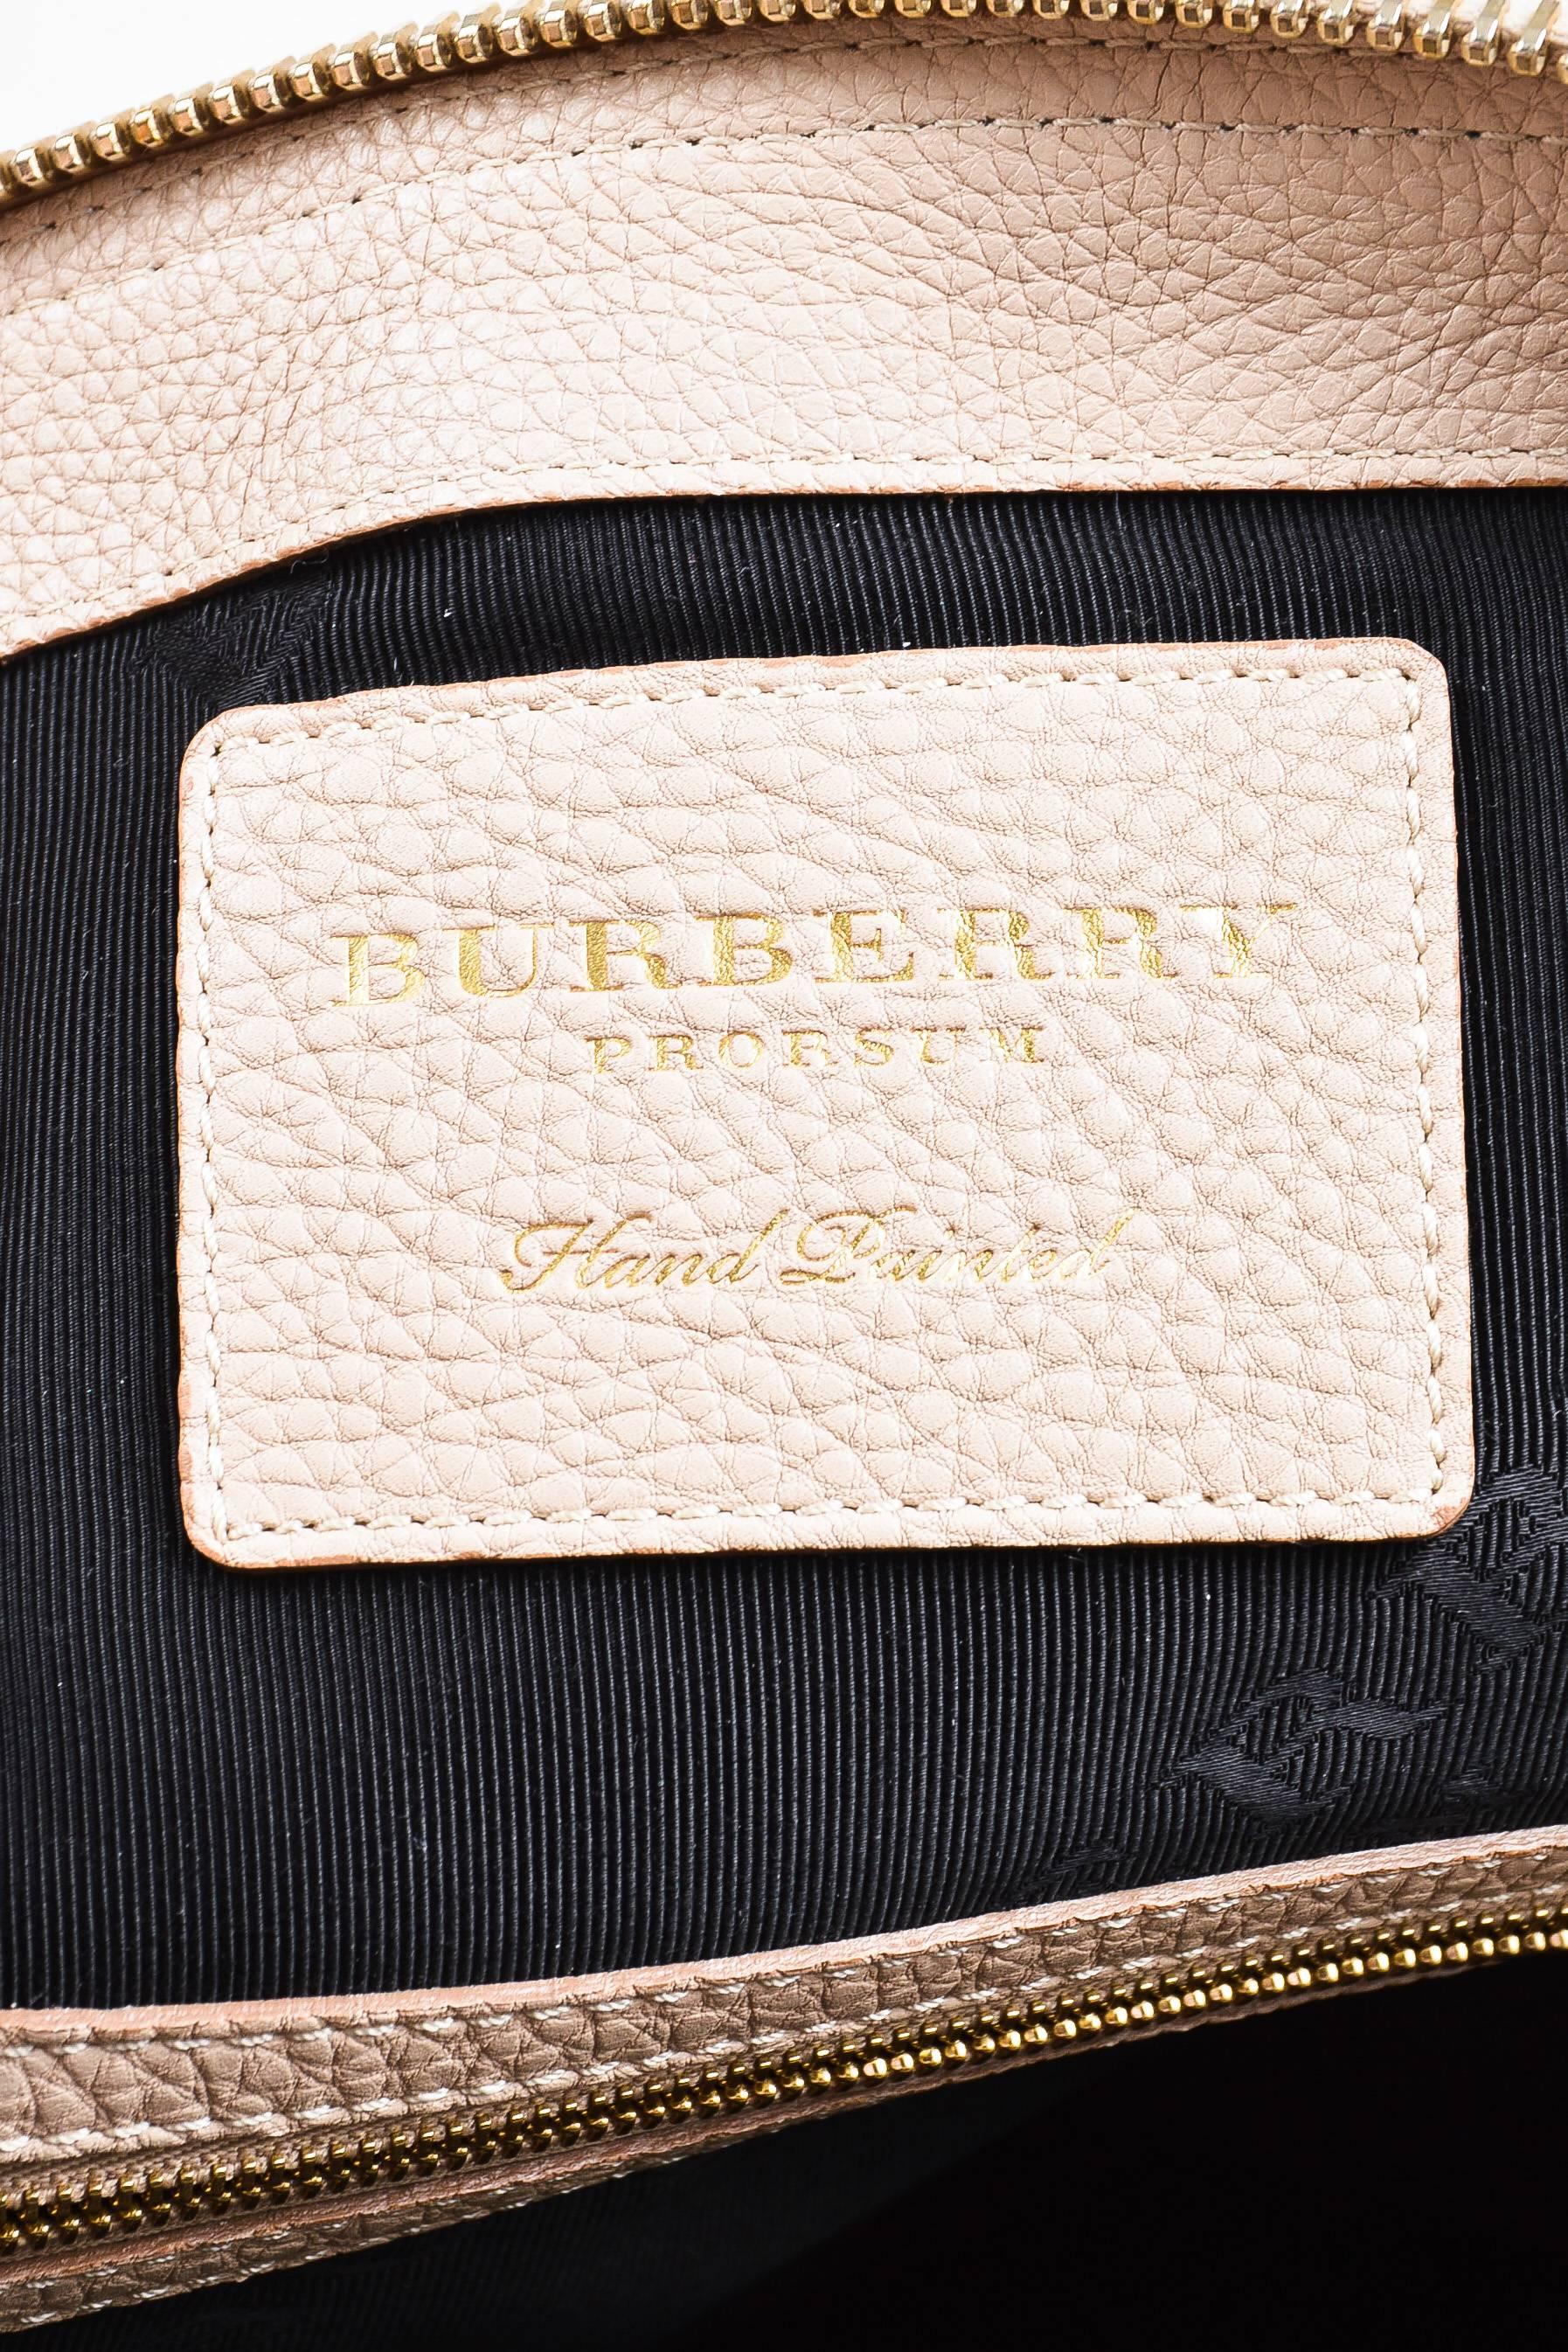 Burberry Prosum Beige Pink Green Pebbled Leather 